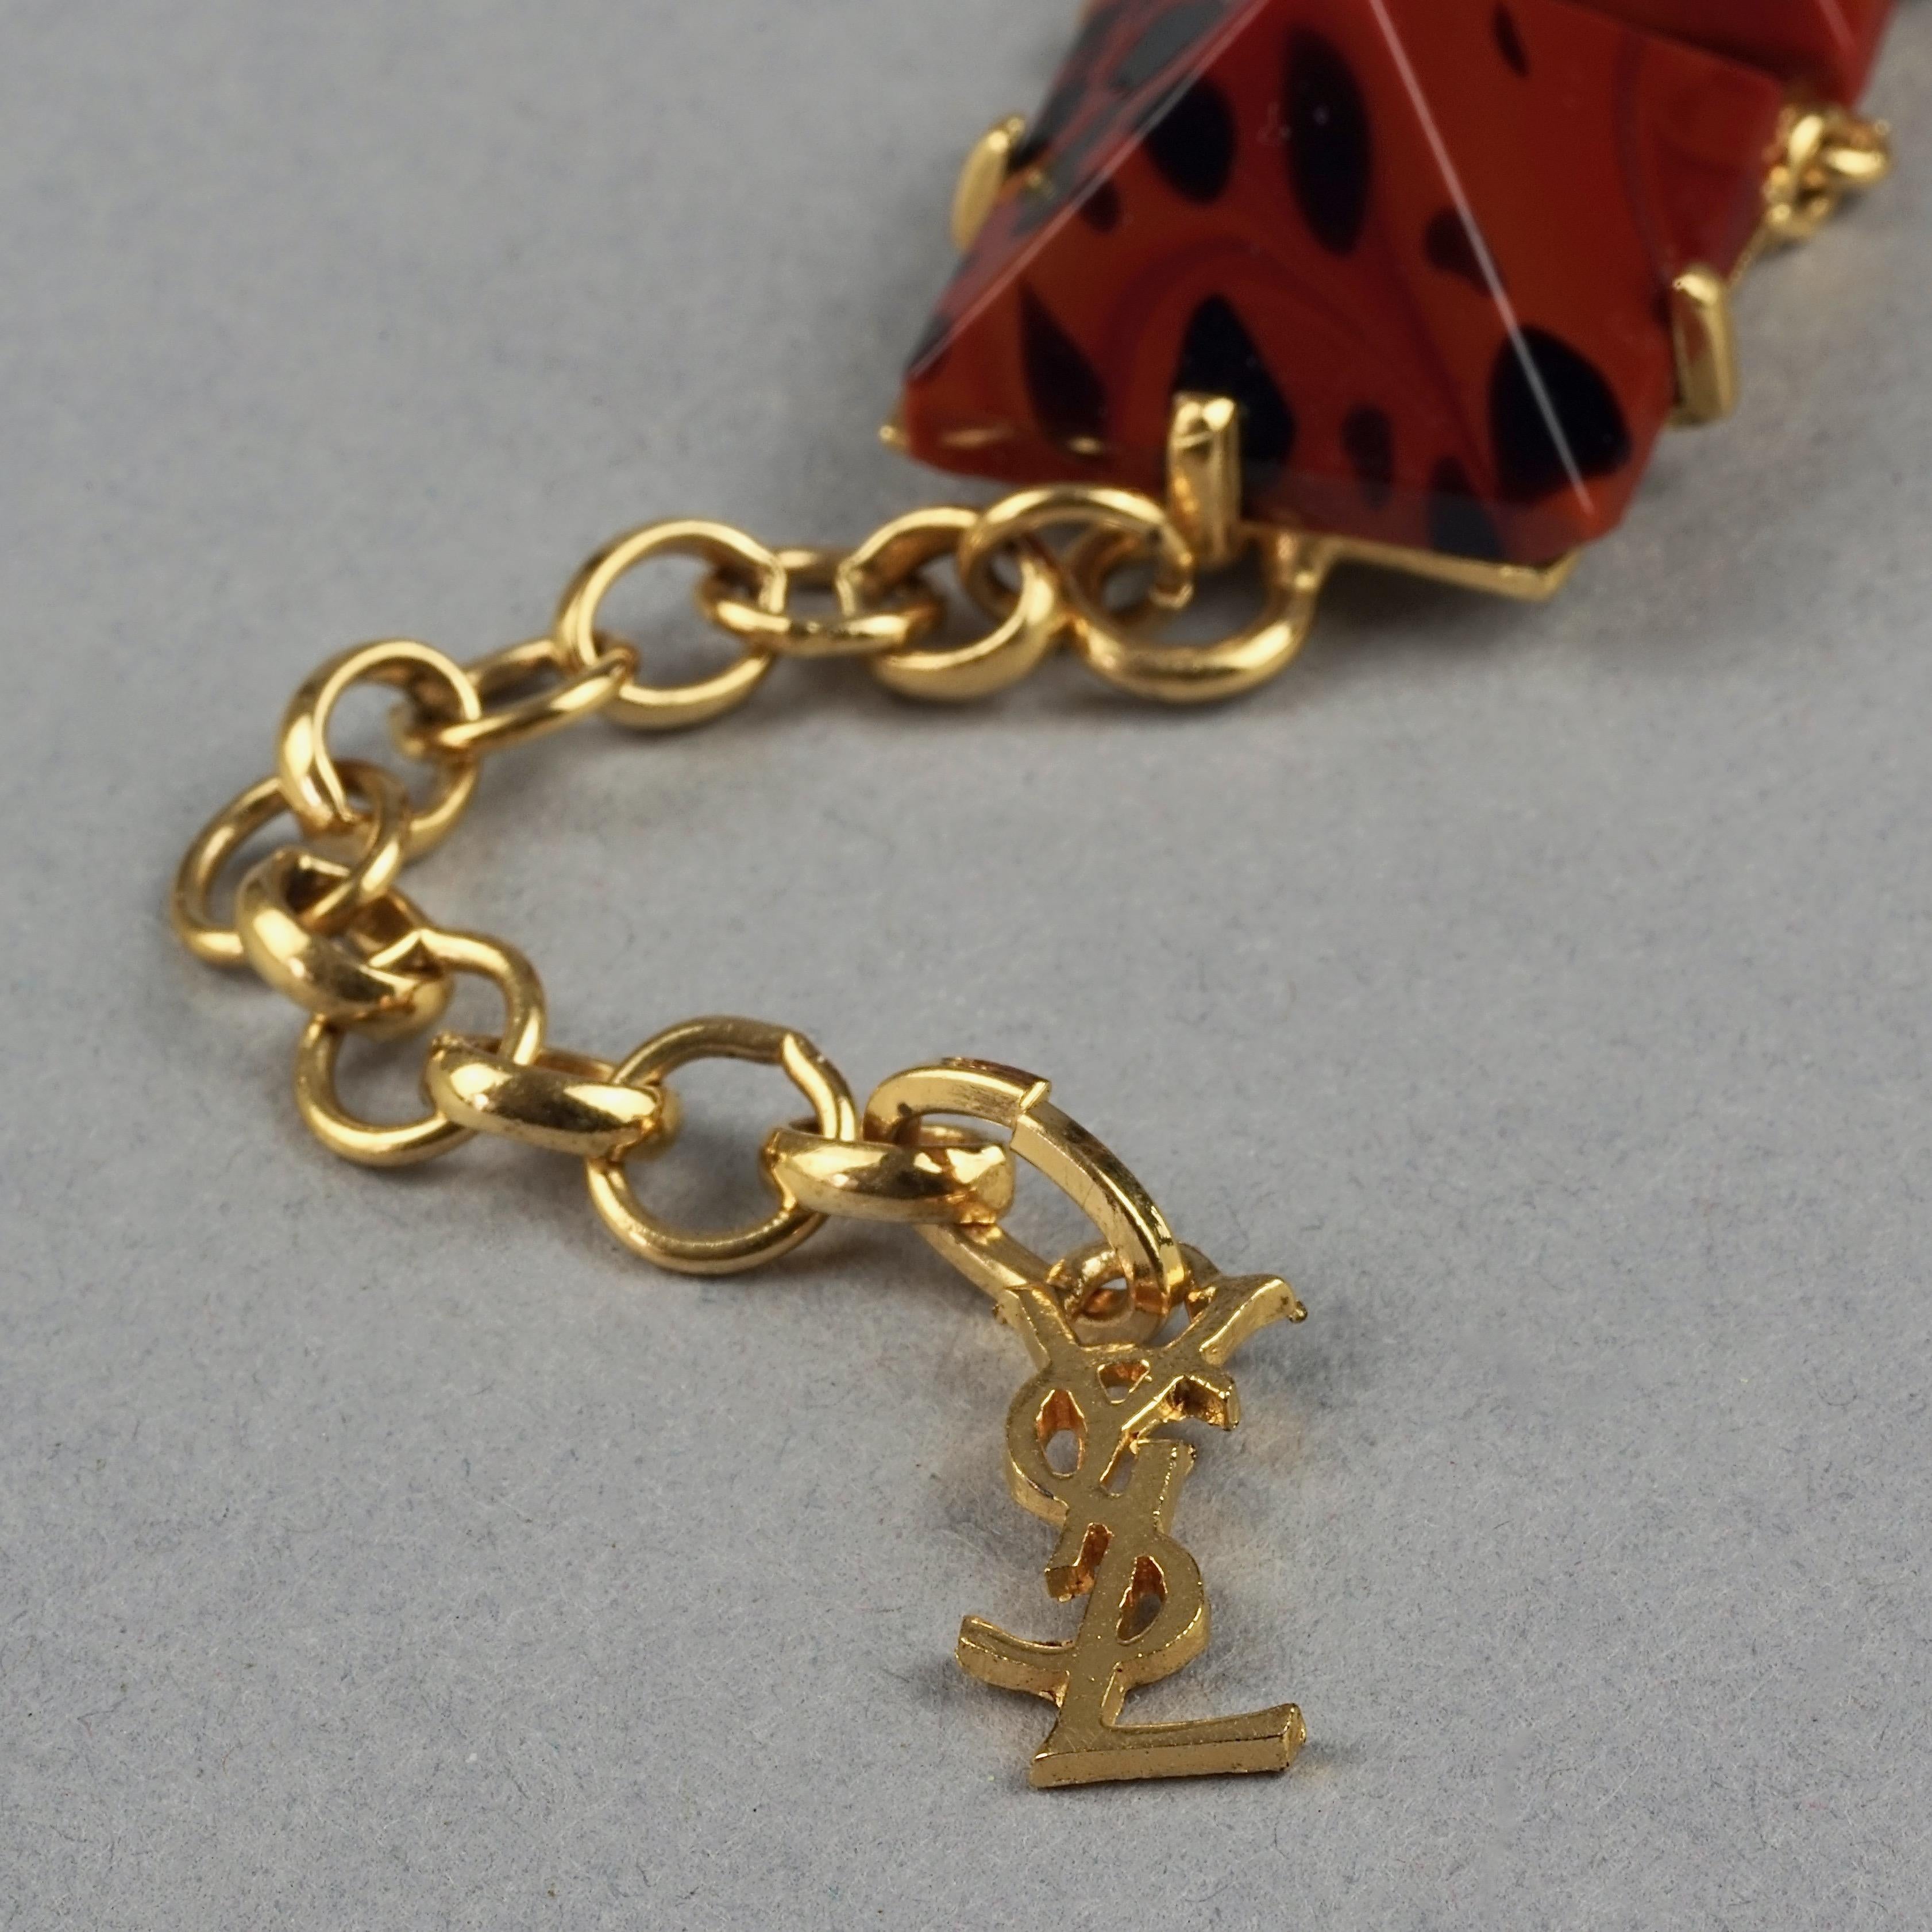 Vintage Iconic YVES SAINT LAURENT Ysl Leopard Pyramid Necklace For Sale 8